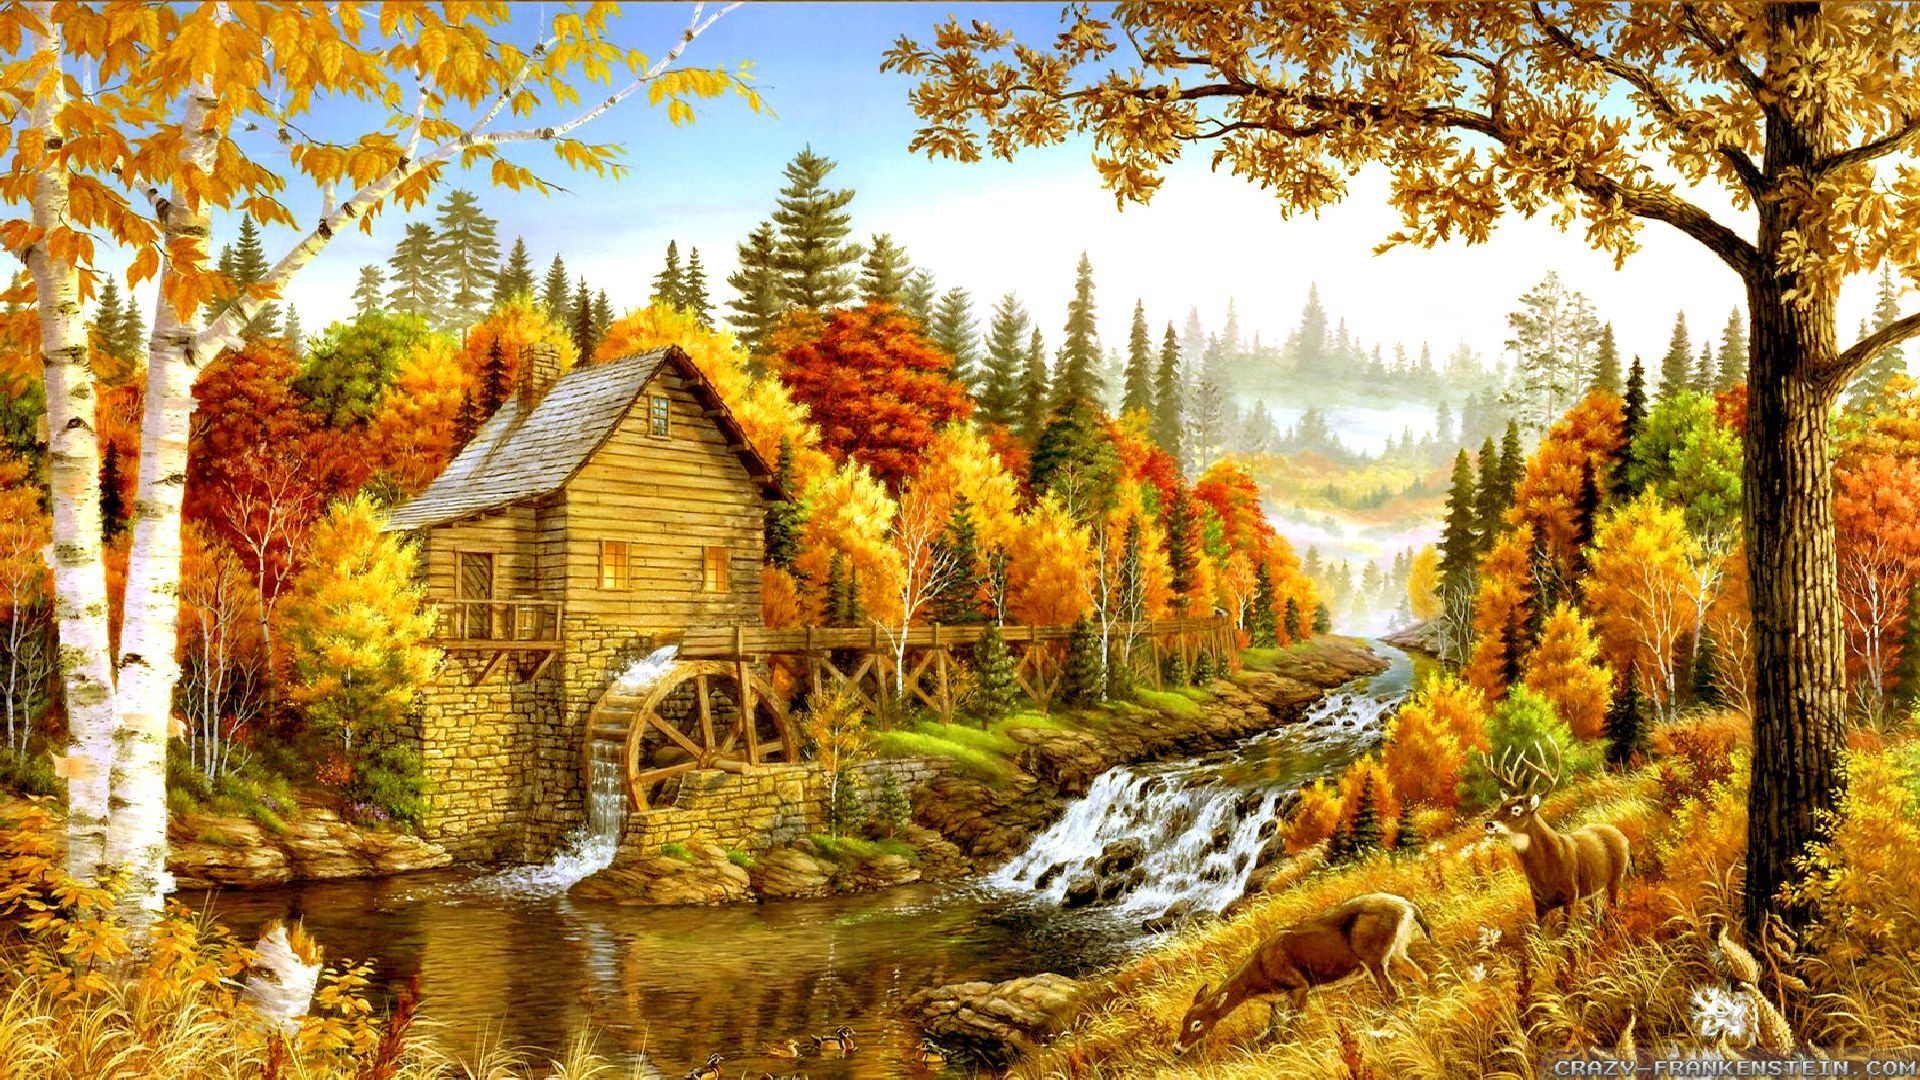 1920x1080 Wallpaper: Countryside watermill autumn landscape wallpapers. Resolution:  1024x768 | 1280x1024 | 1600x1200. Widescreen Res: 1440x900 | 1680x1050 |  1920x1200